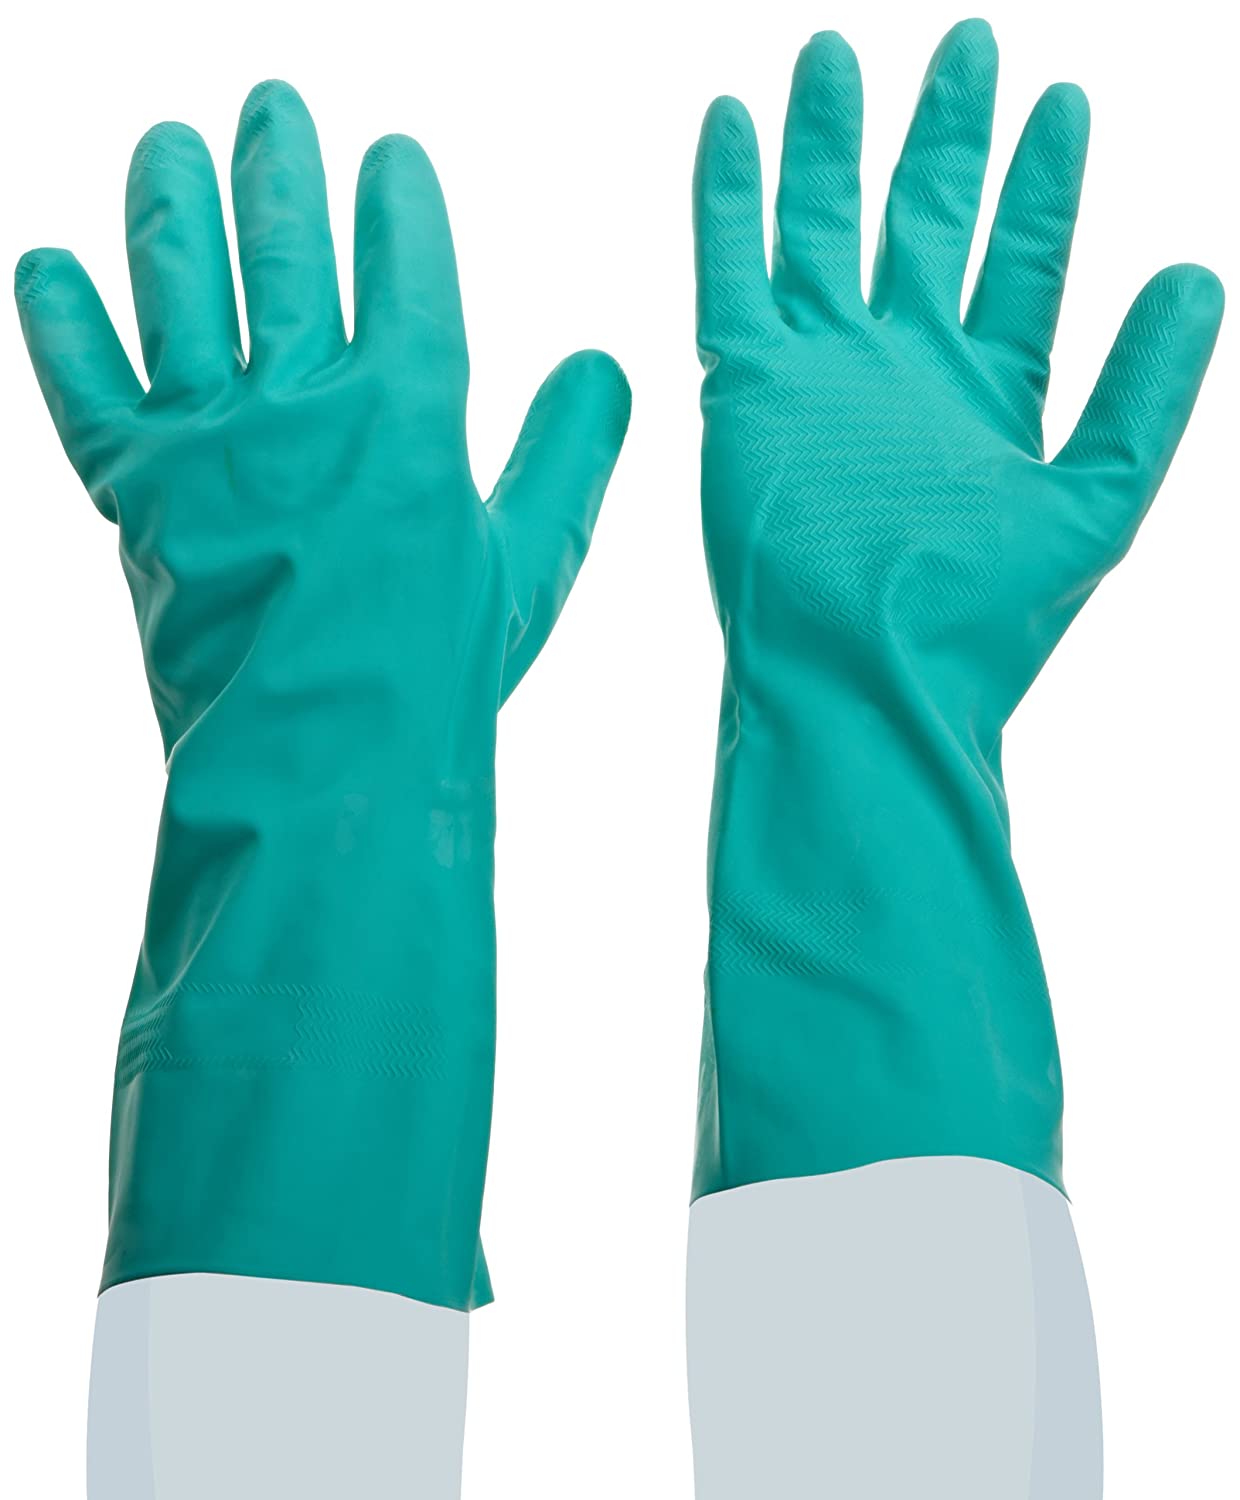 Showa® NM15 chemical-resistant 15-mil unsupported 13-inch unlined Nitrile Gloves